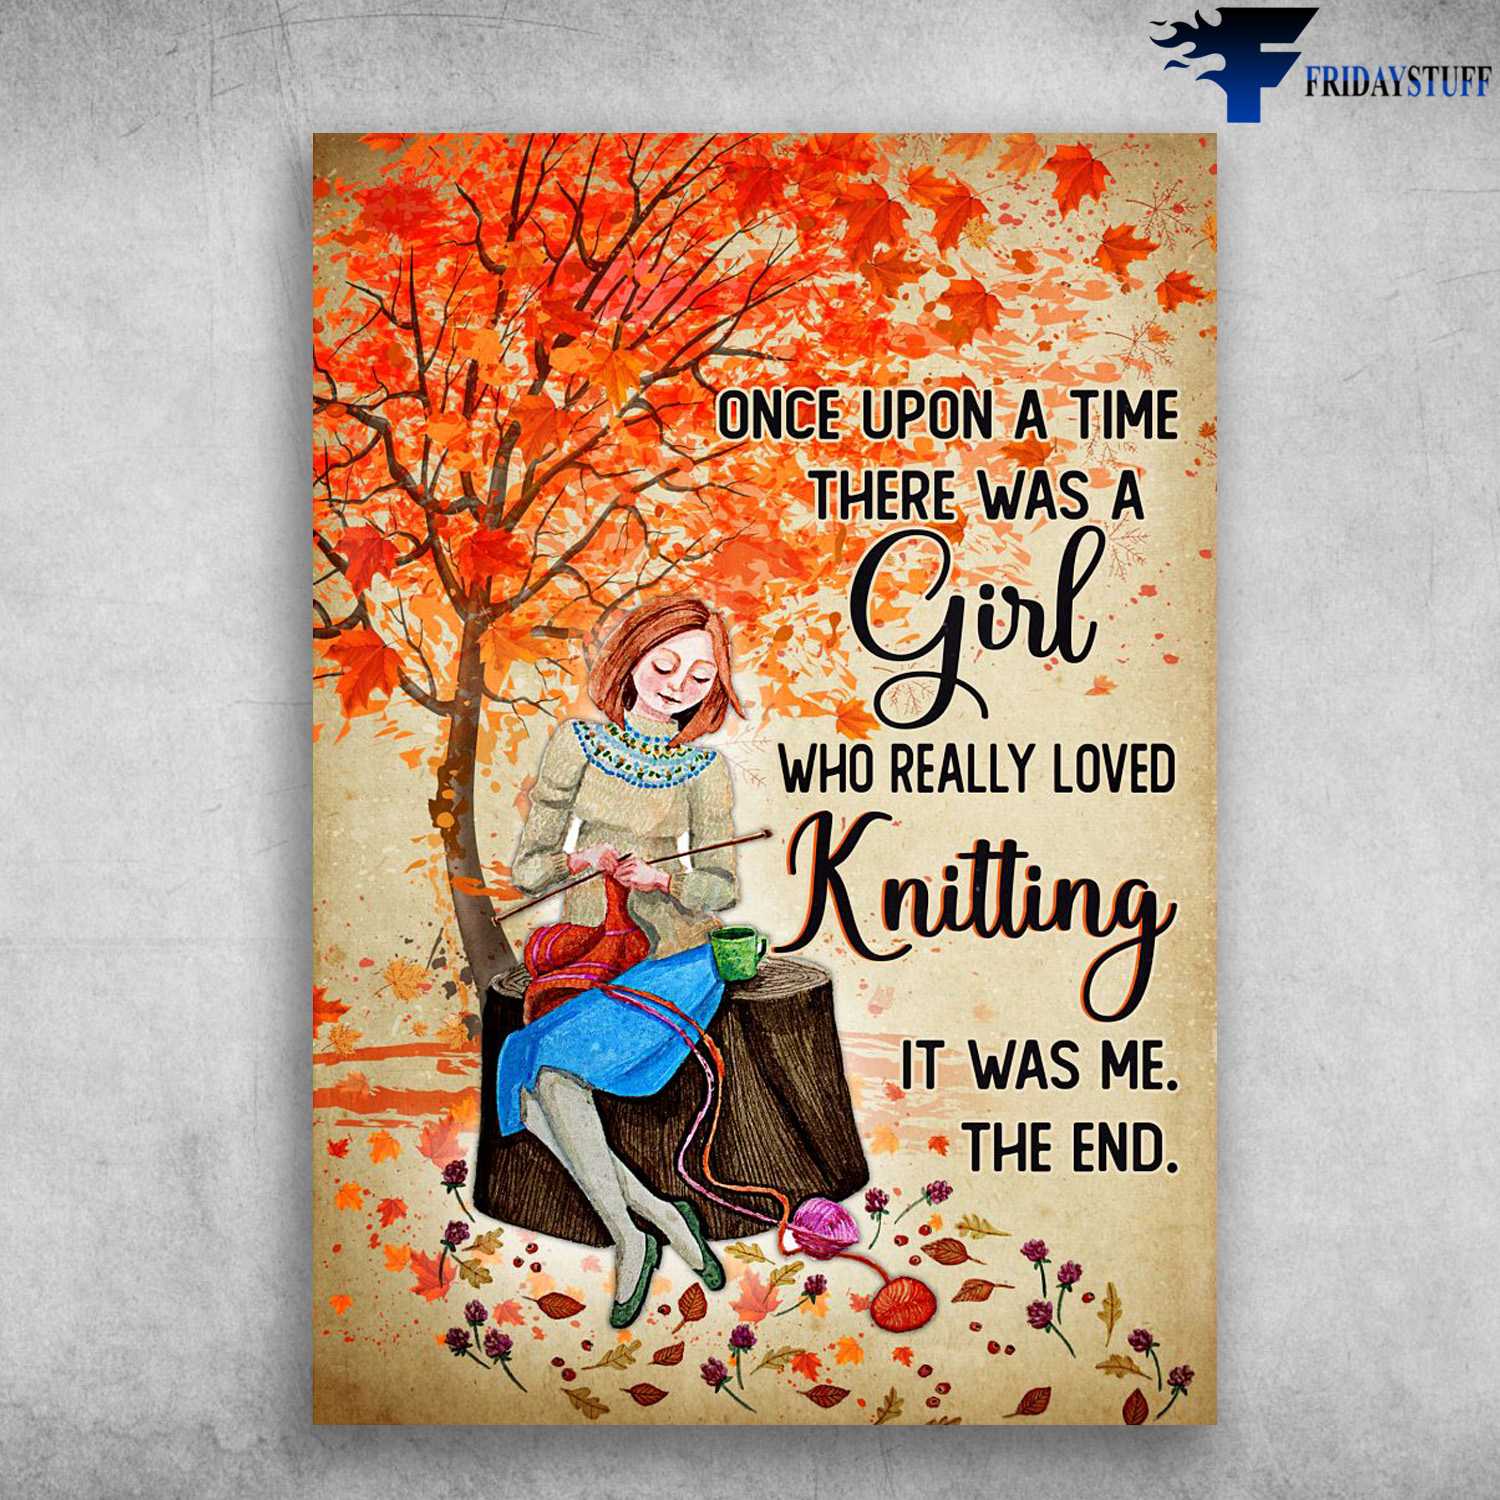 Kniting Lover, Knitting Girl, Once Upon A Time, There Was A Girl, Who Really Loved Knitting, It Was Me, The End